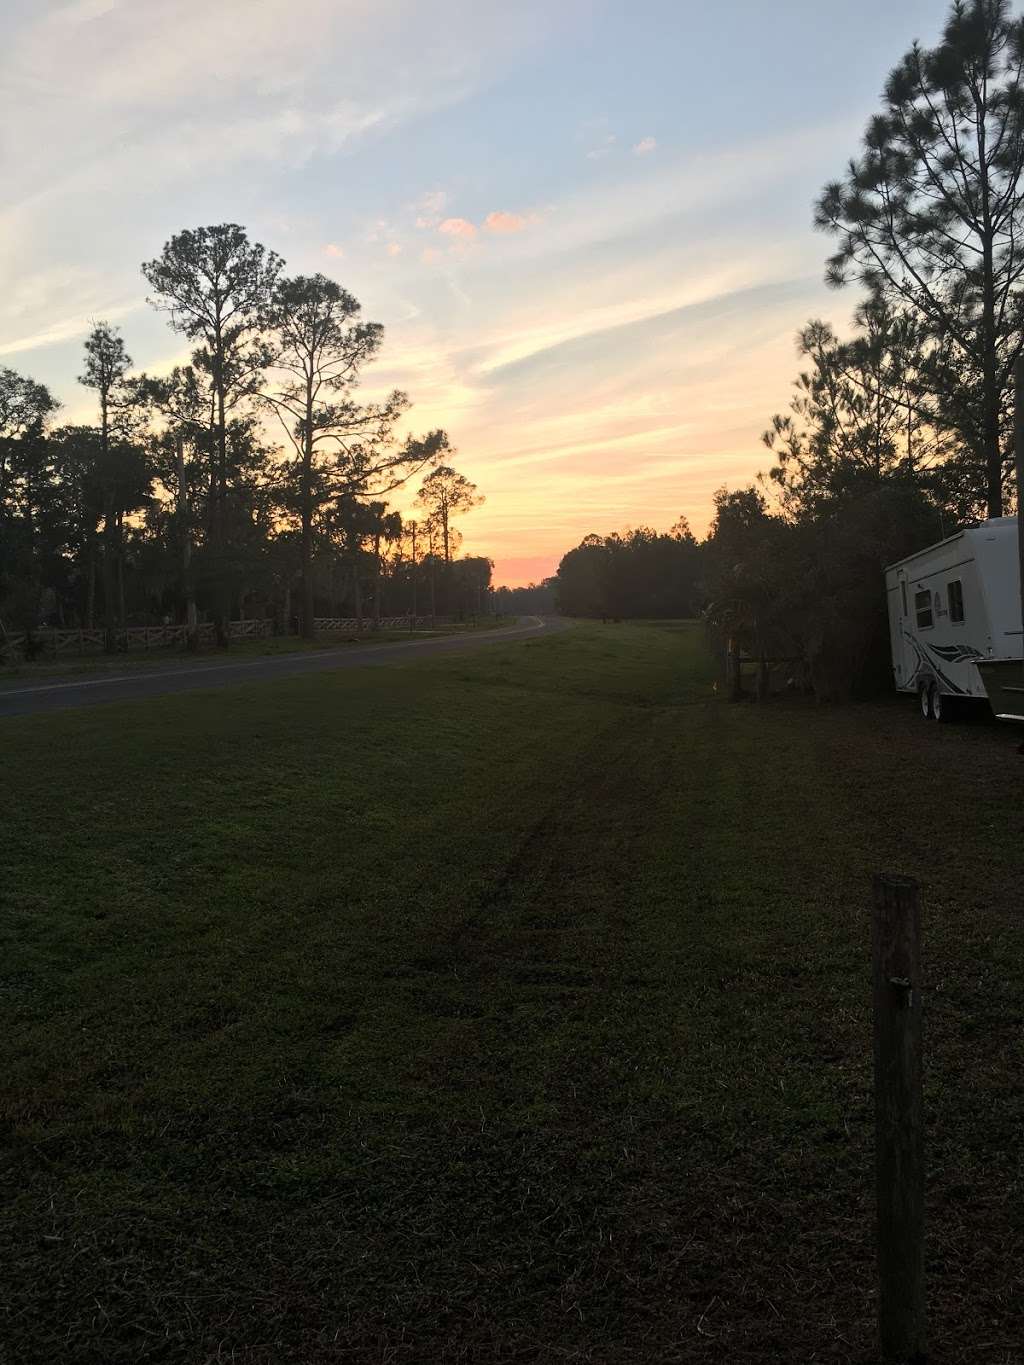 Parramores Campground | 1675 Camp South Moon Rd, Astor, FL 32102, USA | Phone: (386) 749-2721